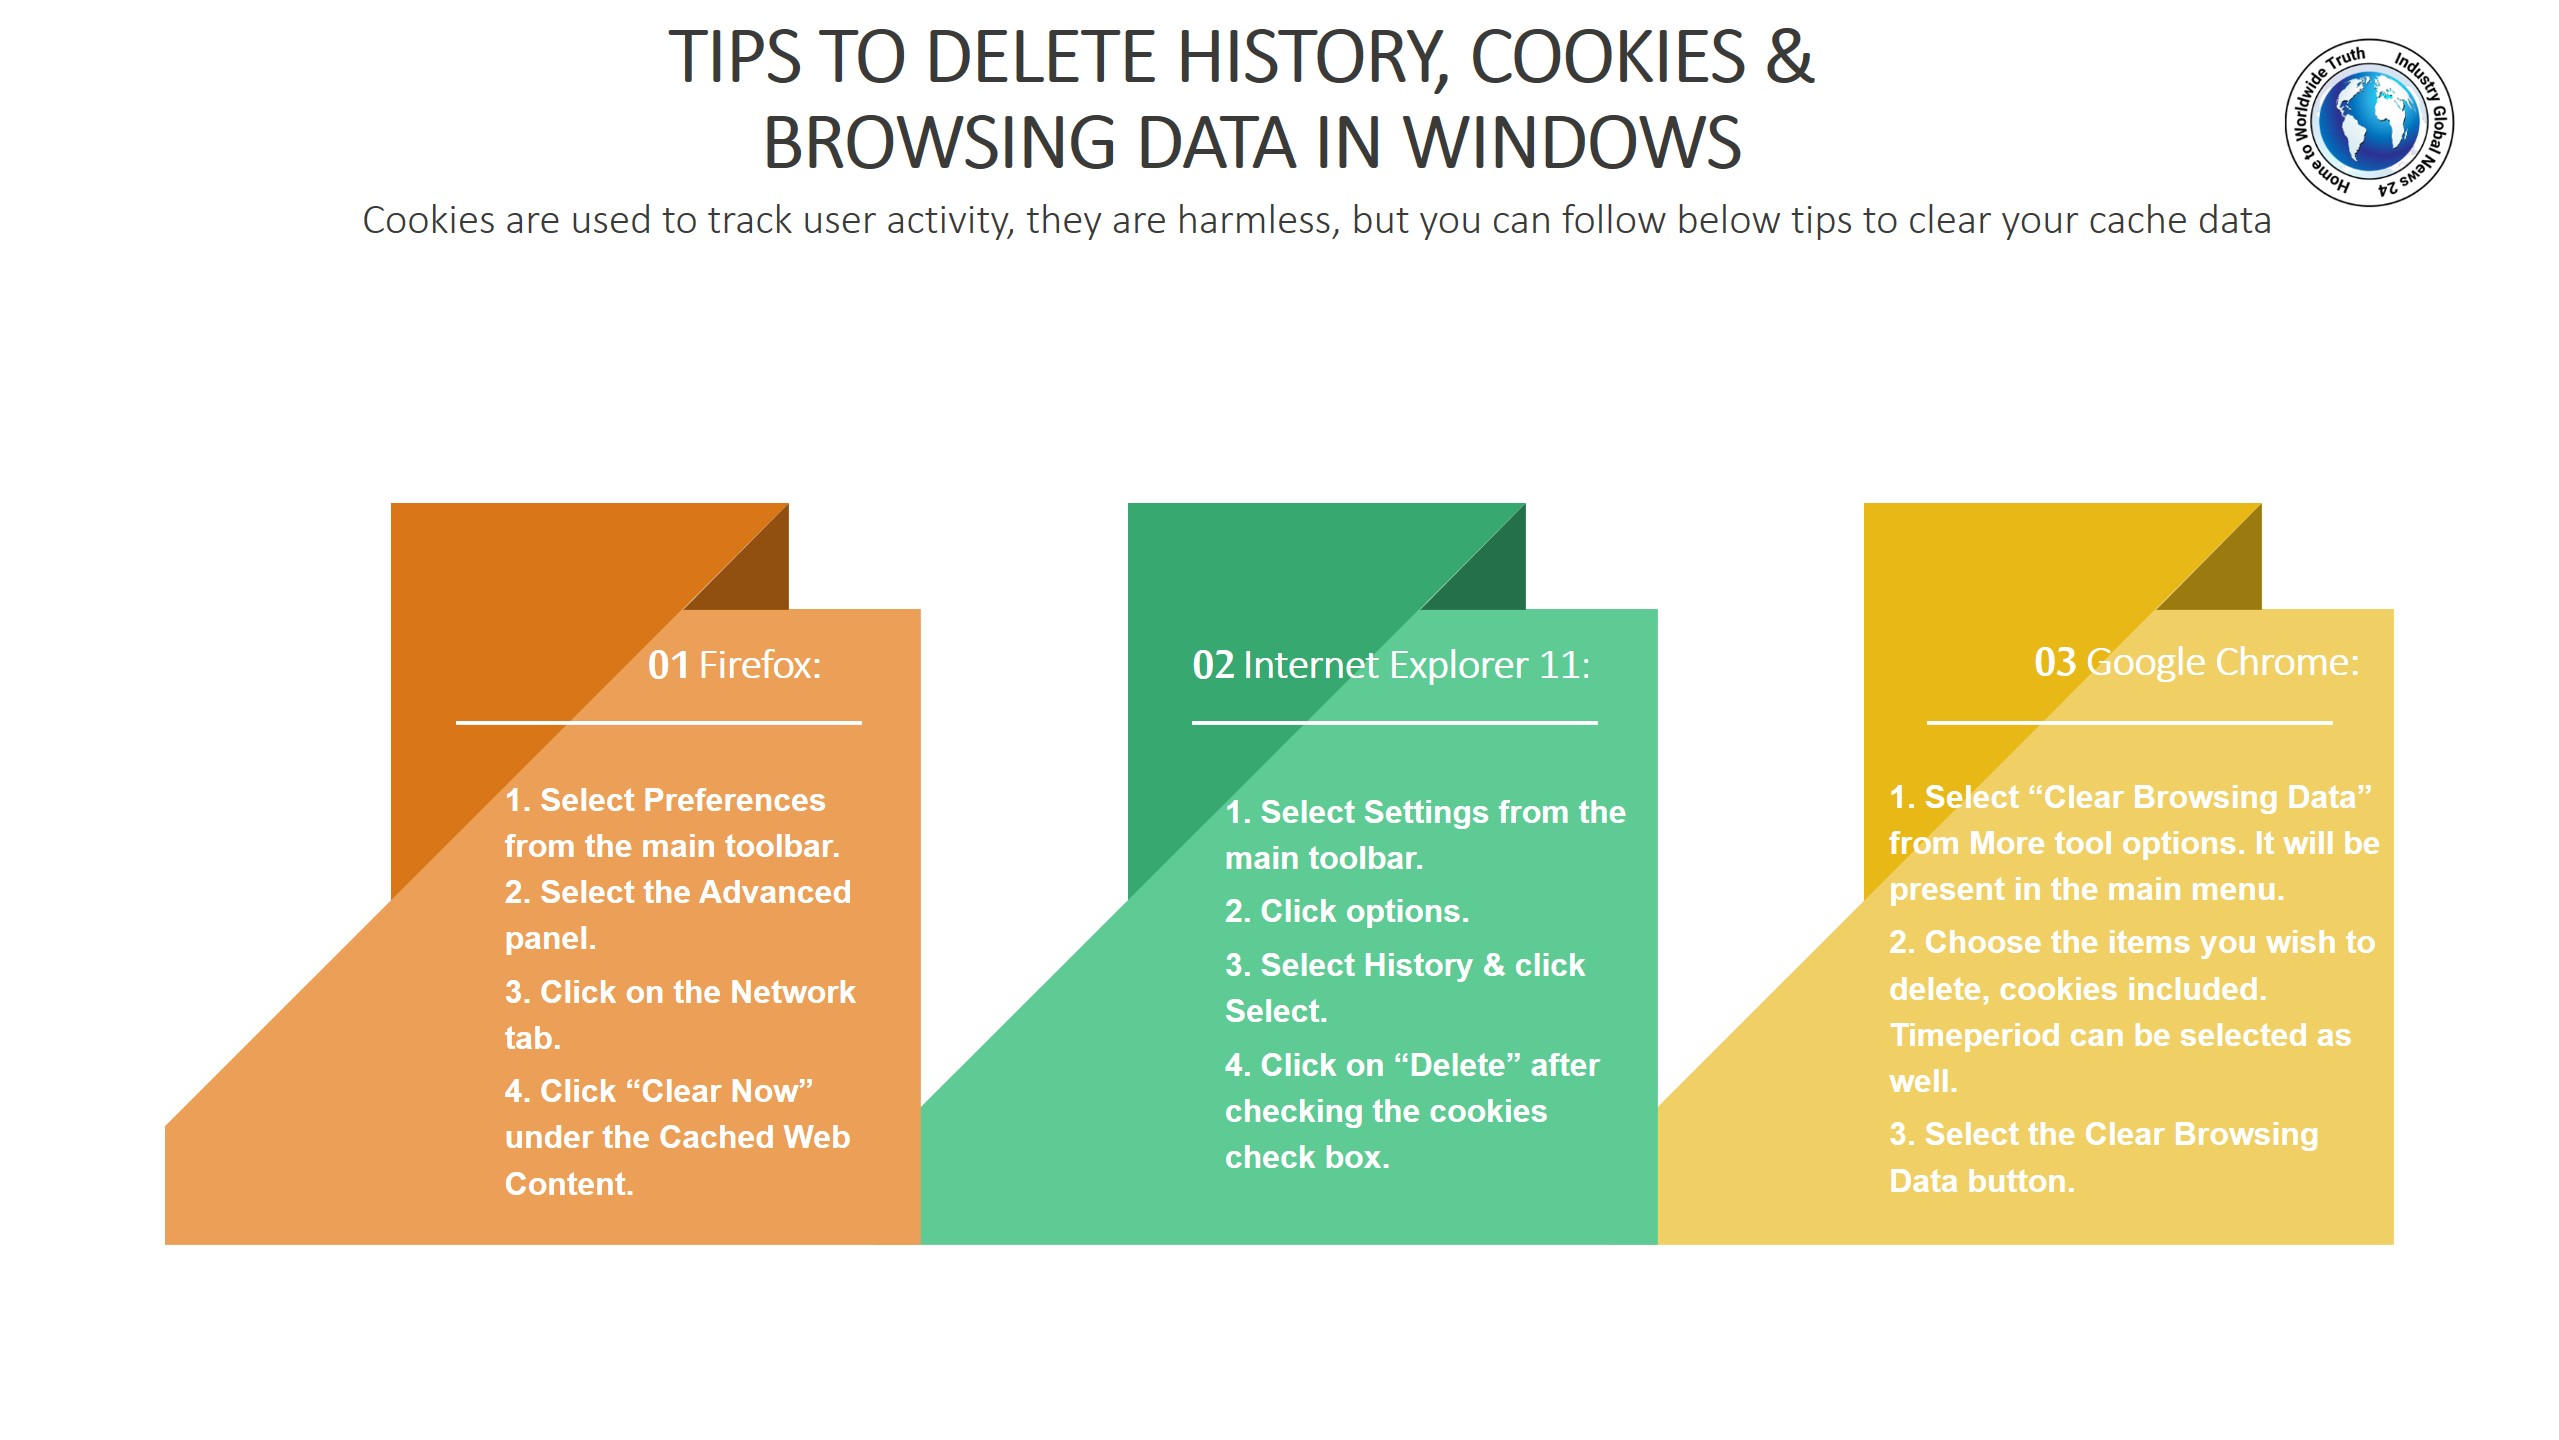 Tips to delete History, Cookies & Browsing data in Windows